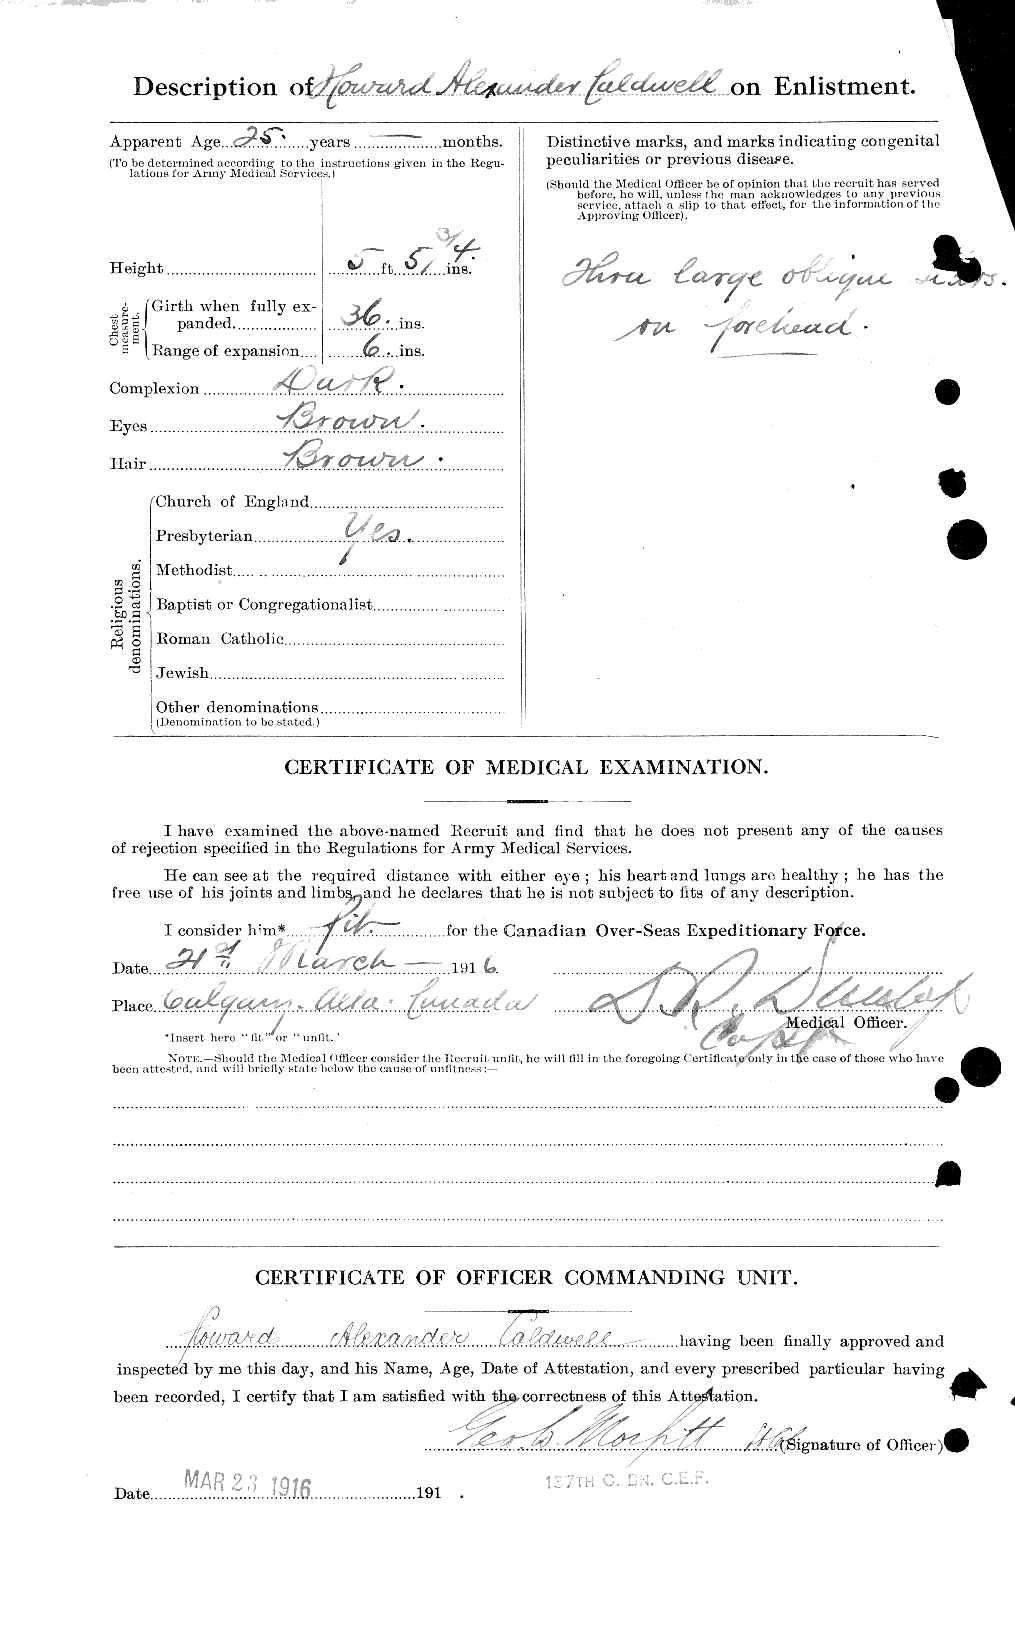 Personnel Records of the First World War - CEF 001058b